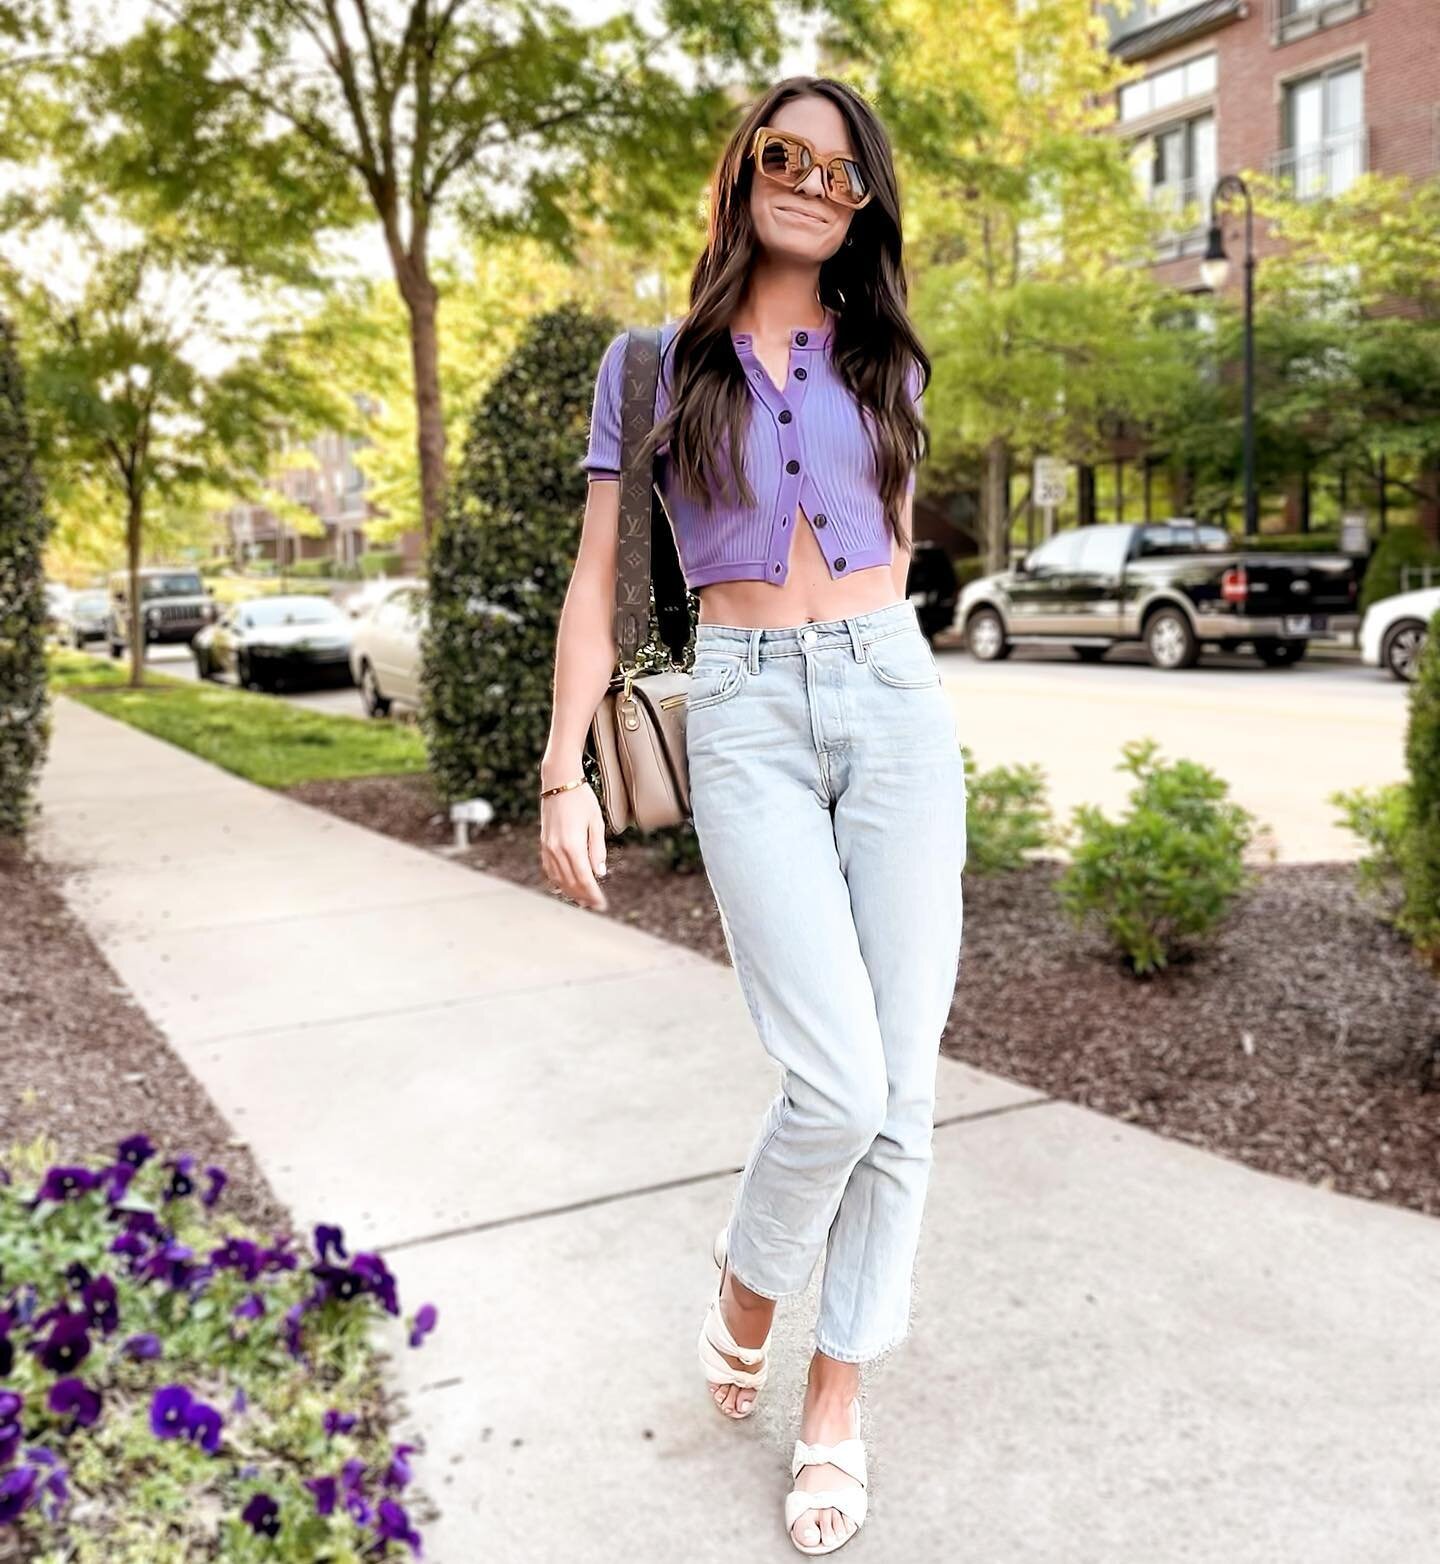 La cr&egrave;me de la crop top 💜✨

Sharing tons of cardigan tops over on @shop.ltk that are perfect for spring styles! Mix them with high waisted jeans, skirts, denim shorts and flare leggings for a casual vibe.

__________________
spring outfit, sp